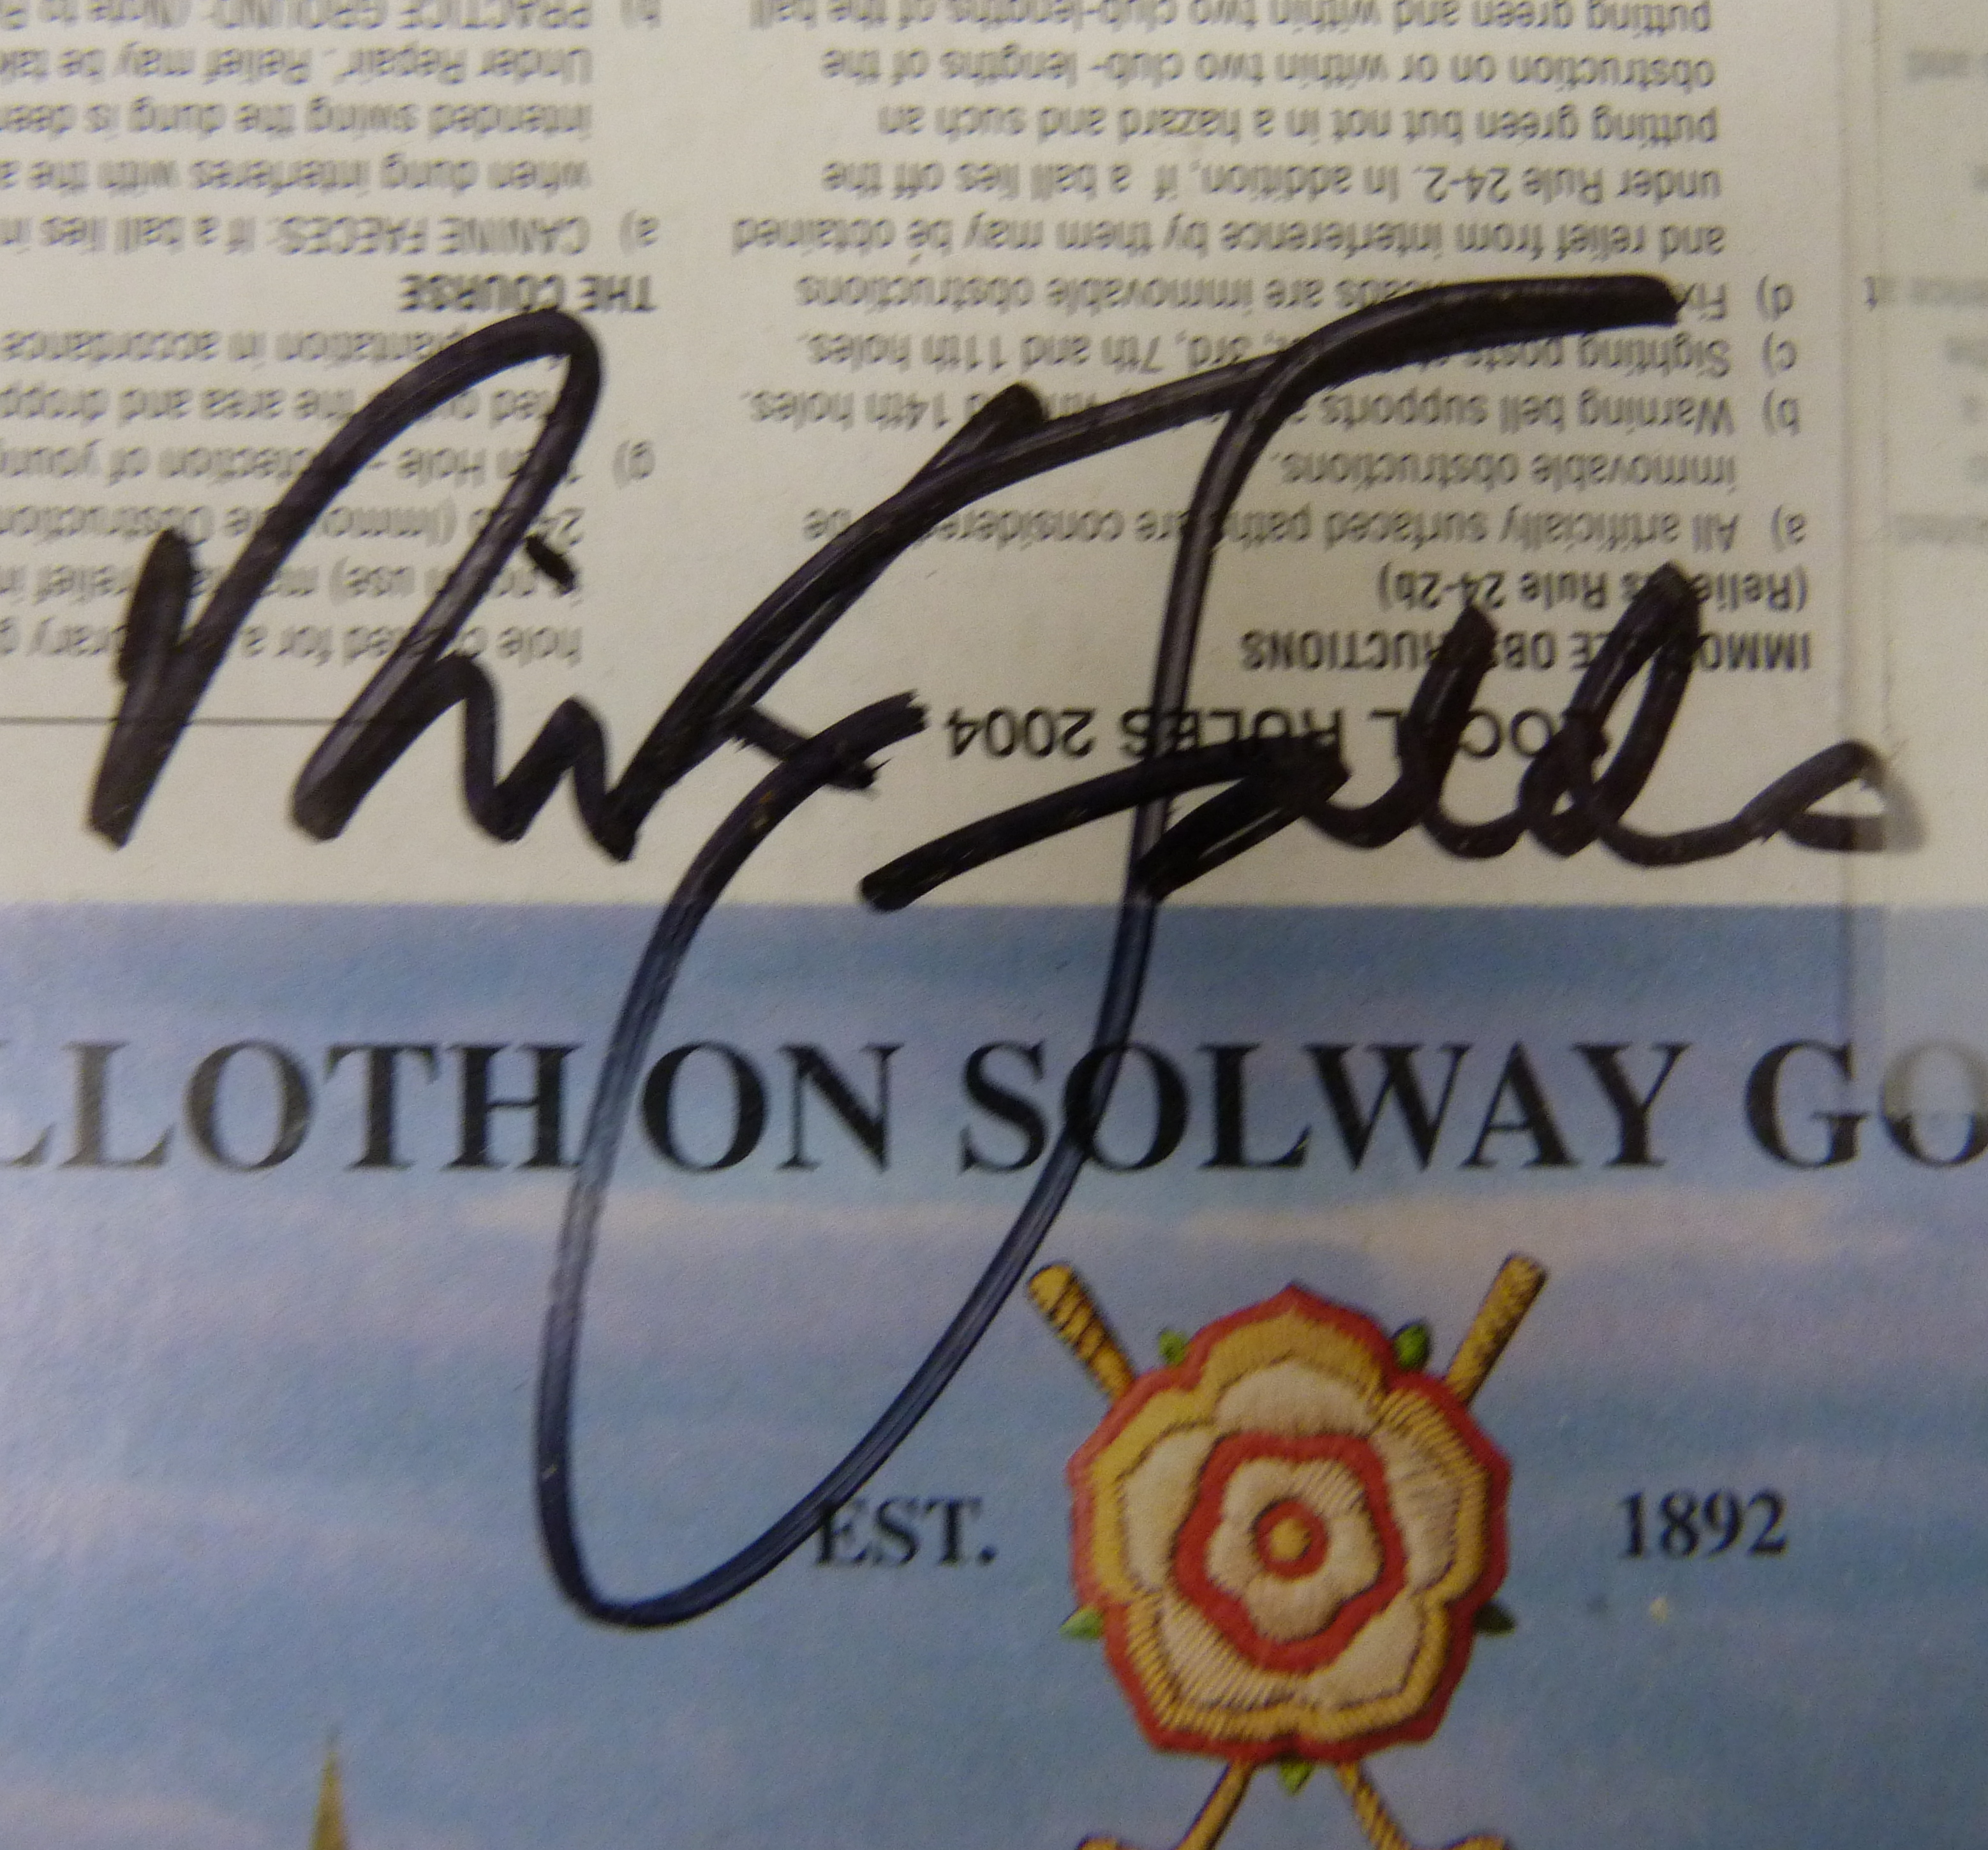 Golf Autographs.  Silloth on Solway golf club score card with autographs of Montgomerie, Woosnam & - Image 2 of 3